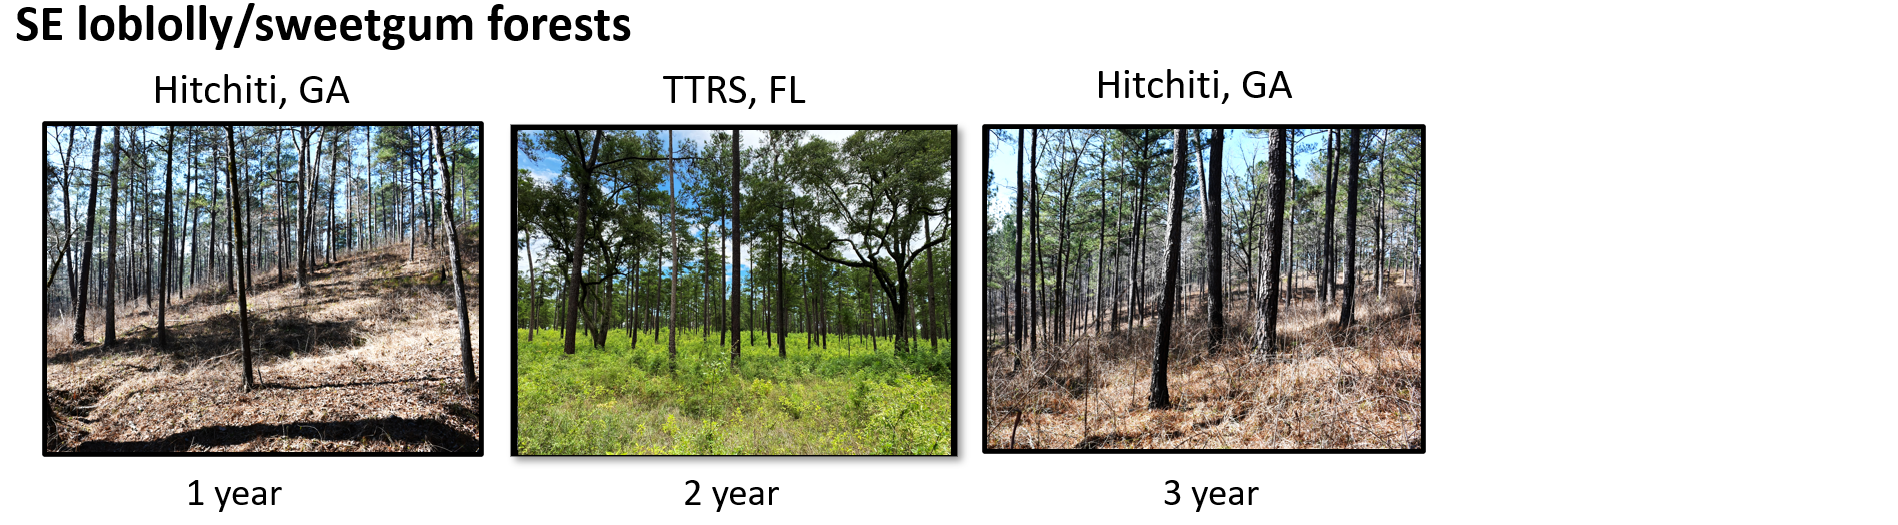 3DFuels SE Loblolly Sweetgum Forests